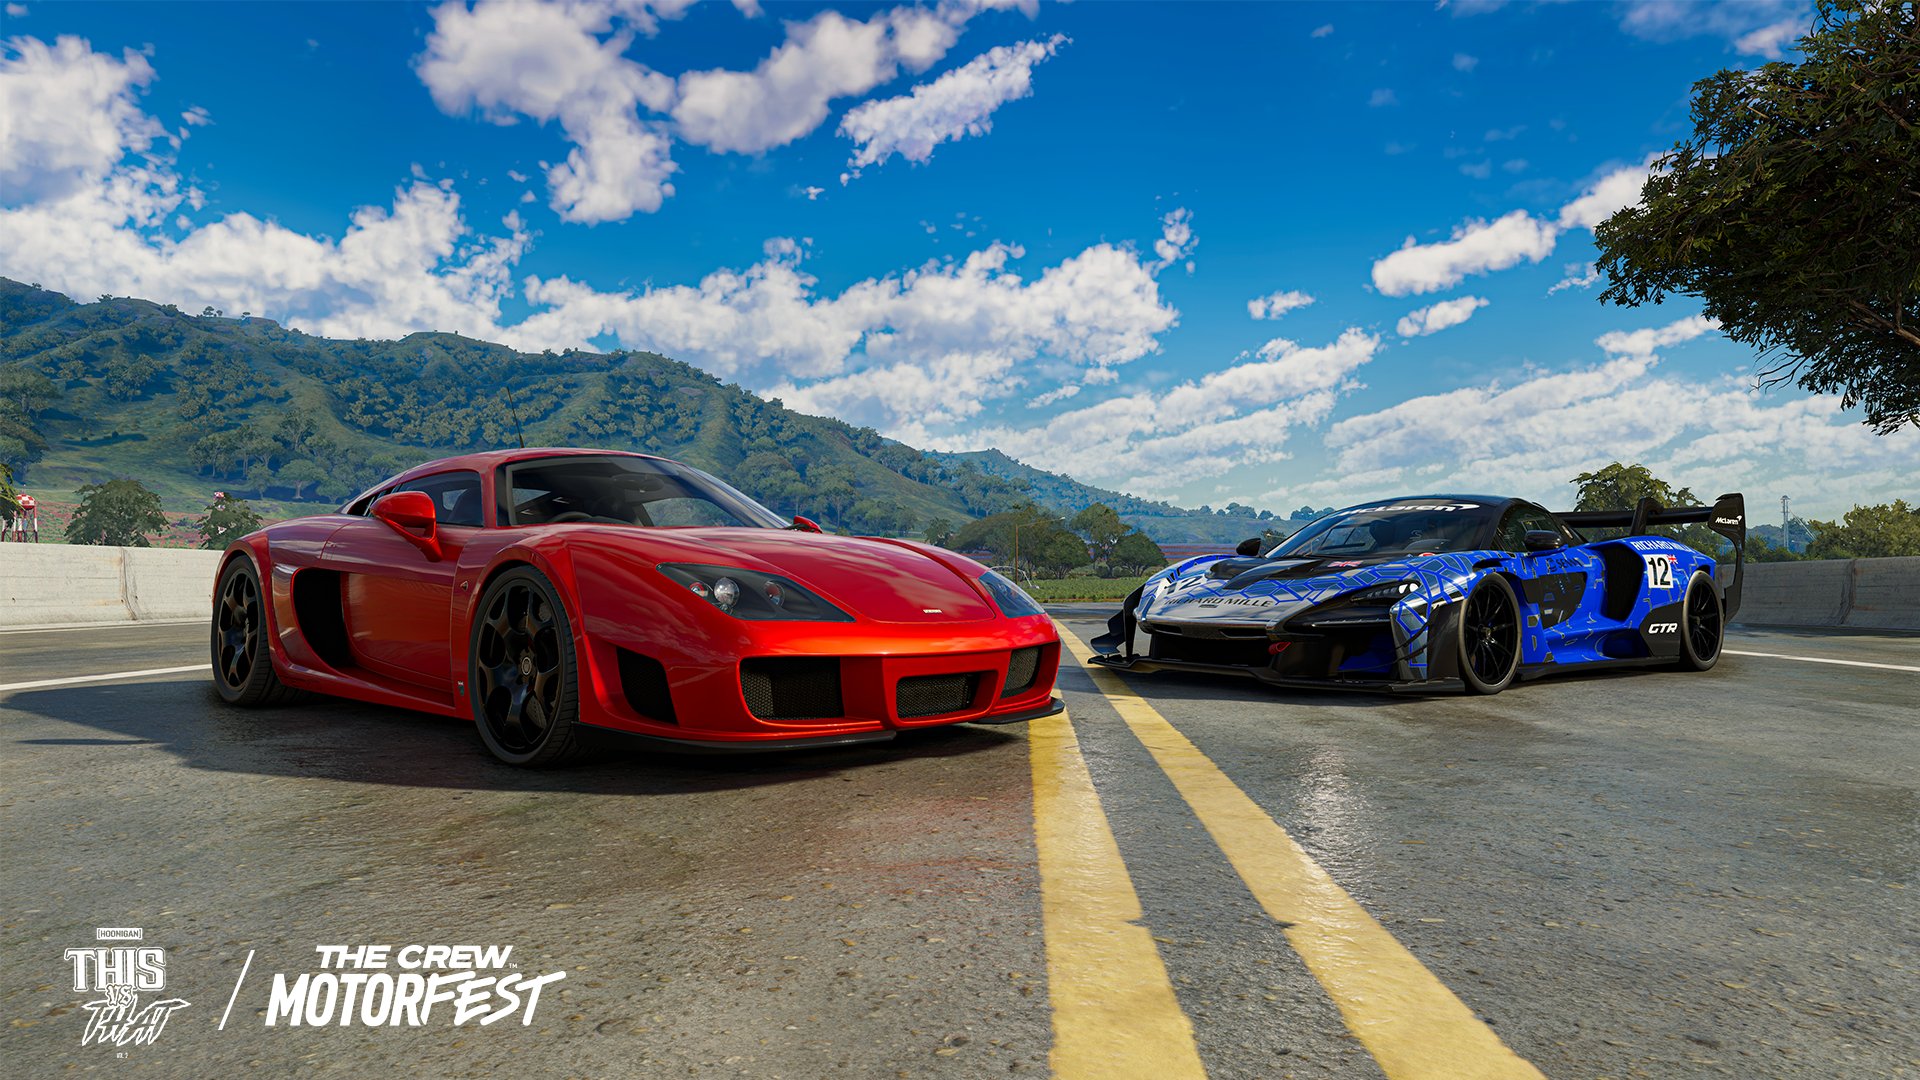 The Crew Motorfest is Out Now - 2EC